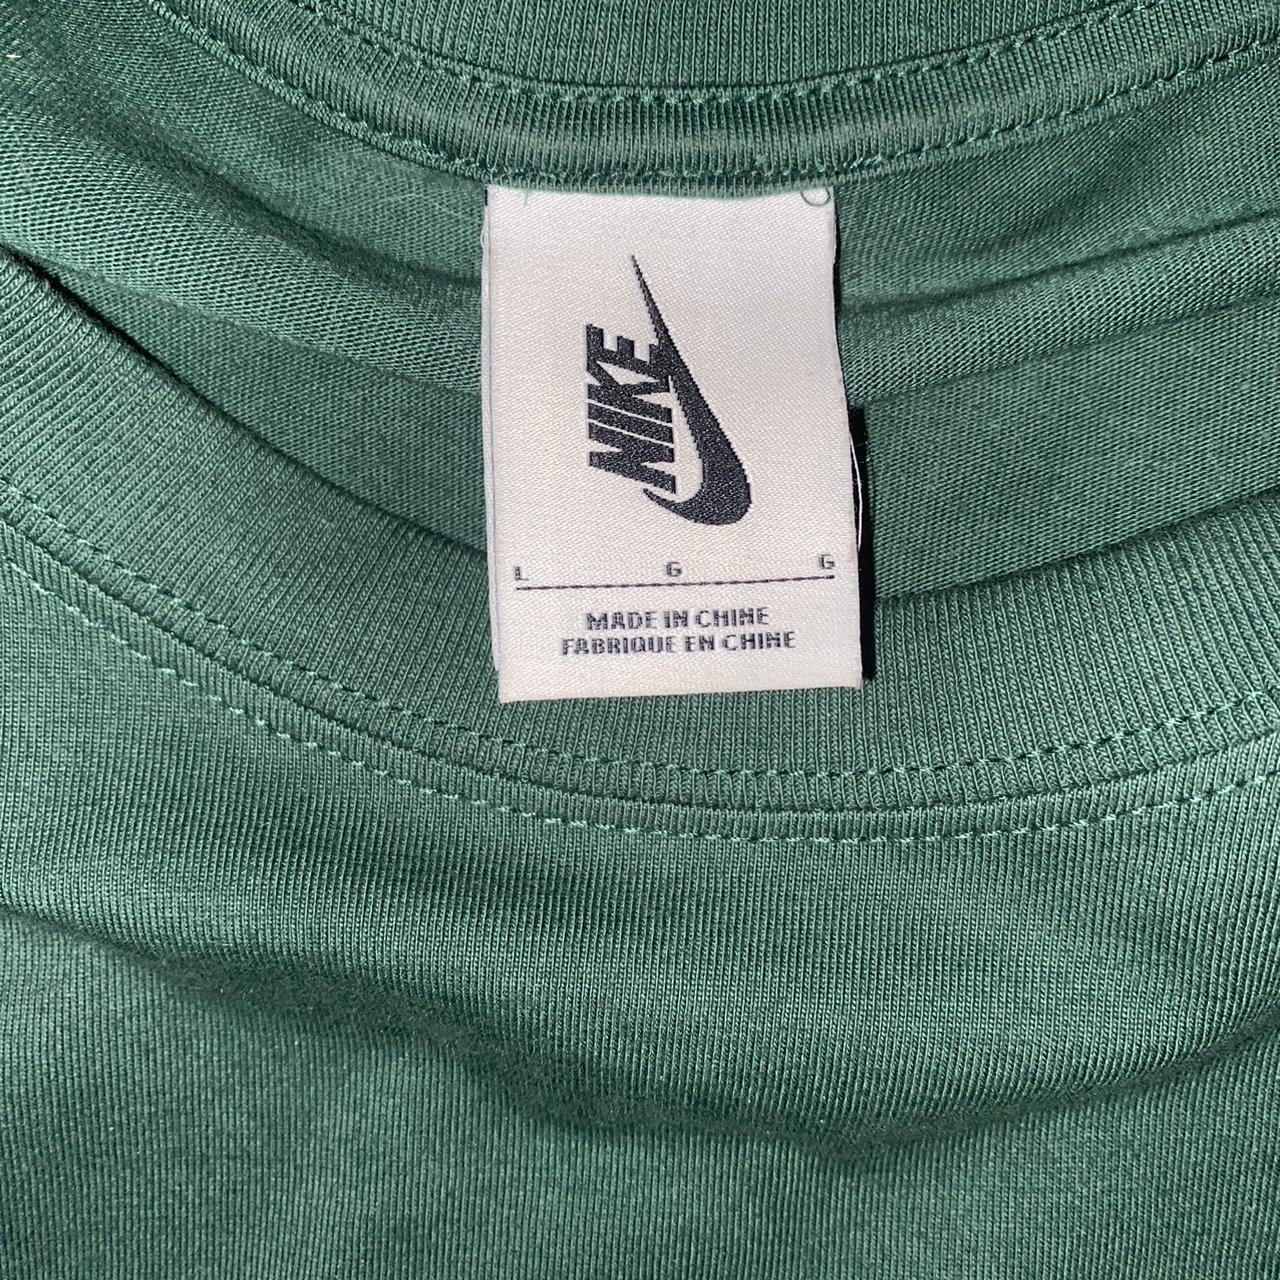 Stussy x Nike Tshirt Size Large but fits really... - Depop